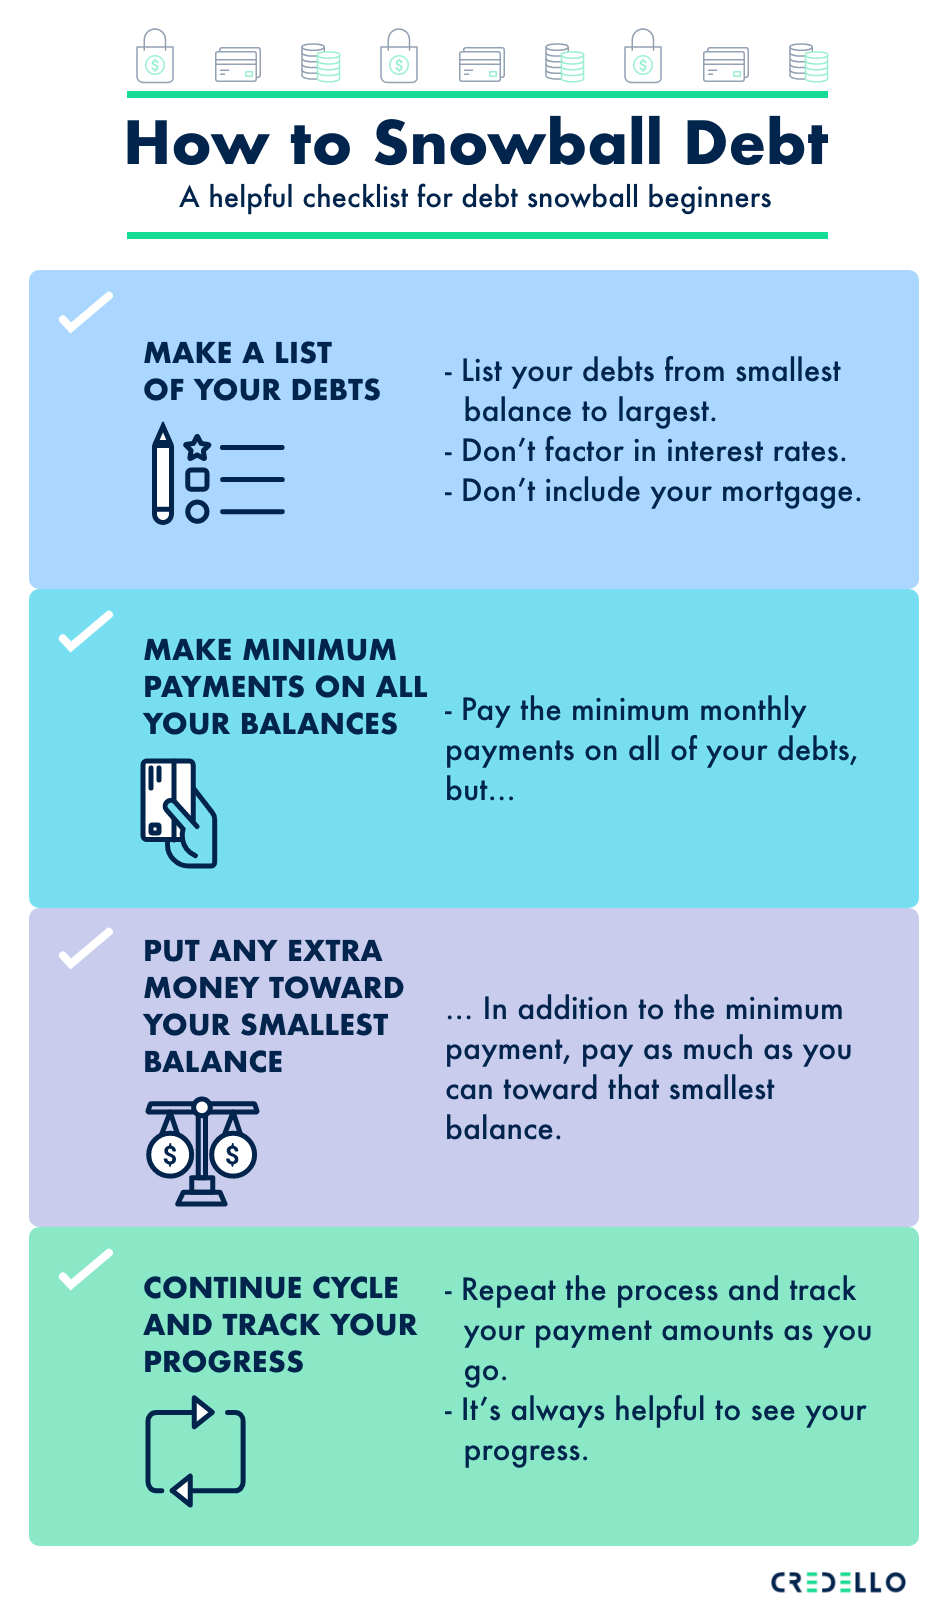 Hwo to snowball debt infographic